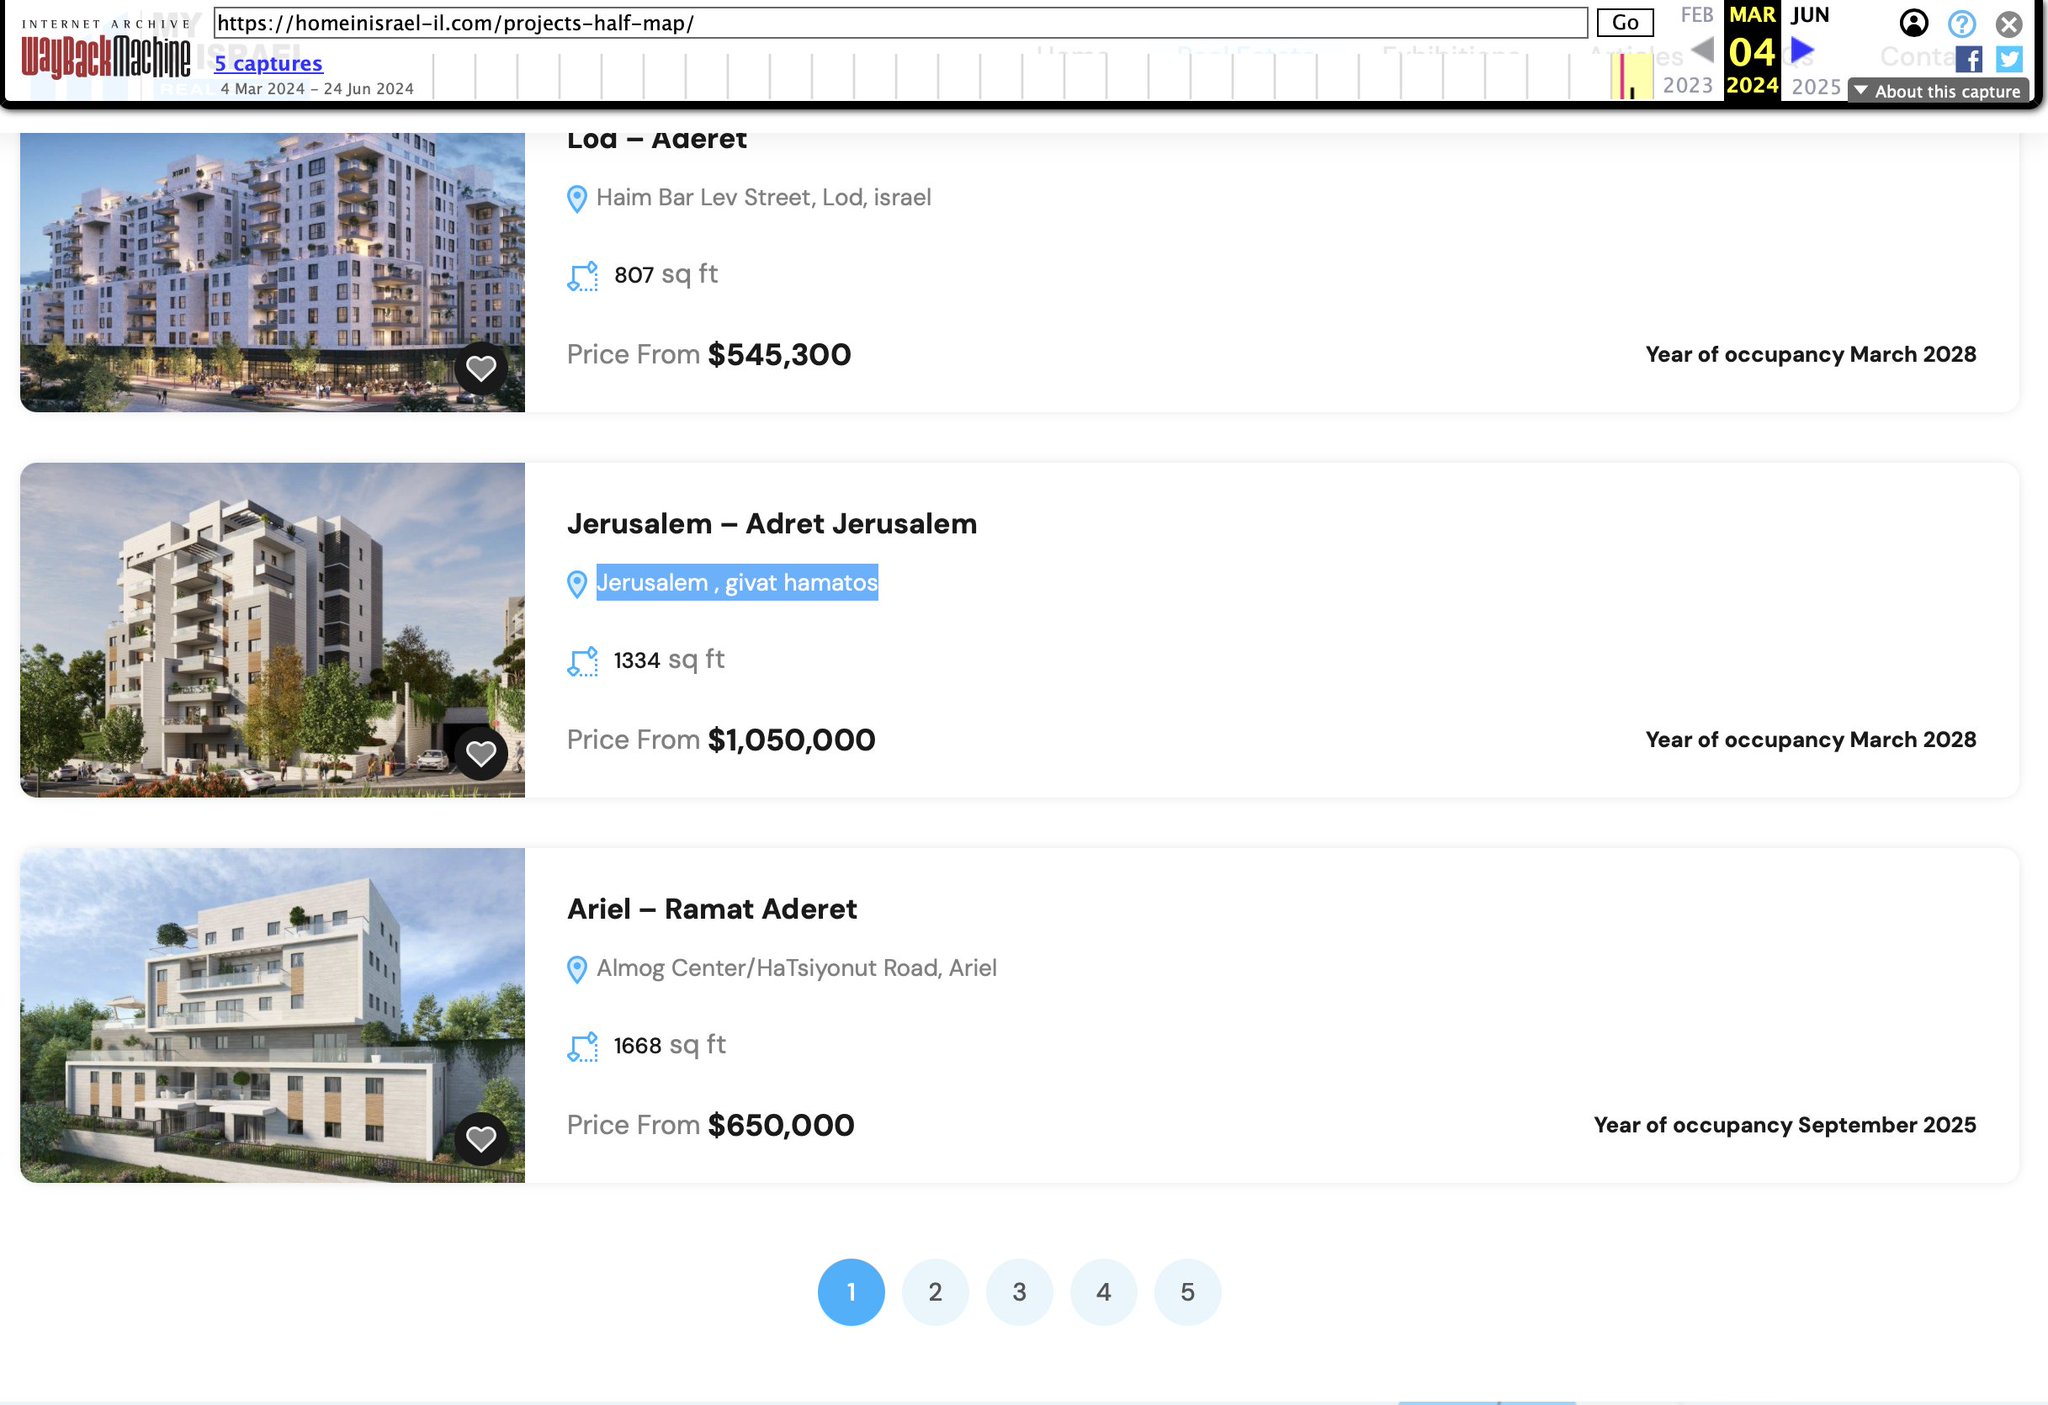 Screencap of property being sold